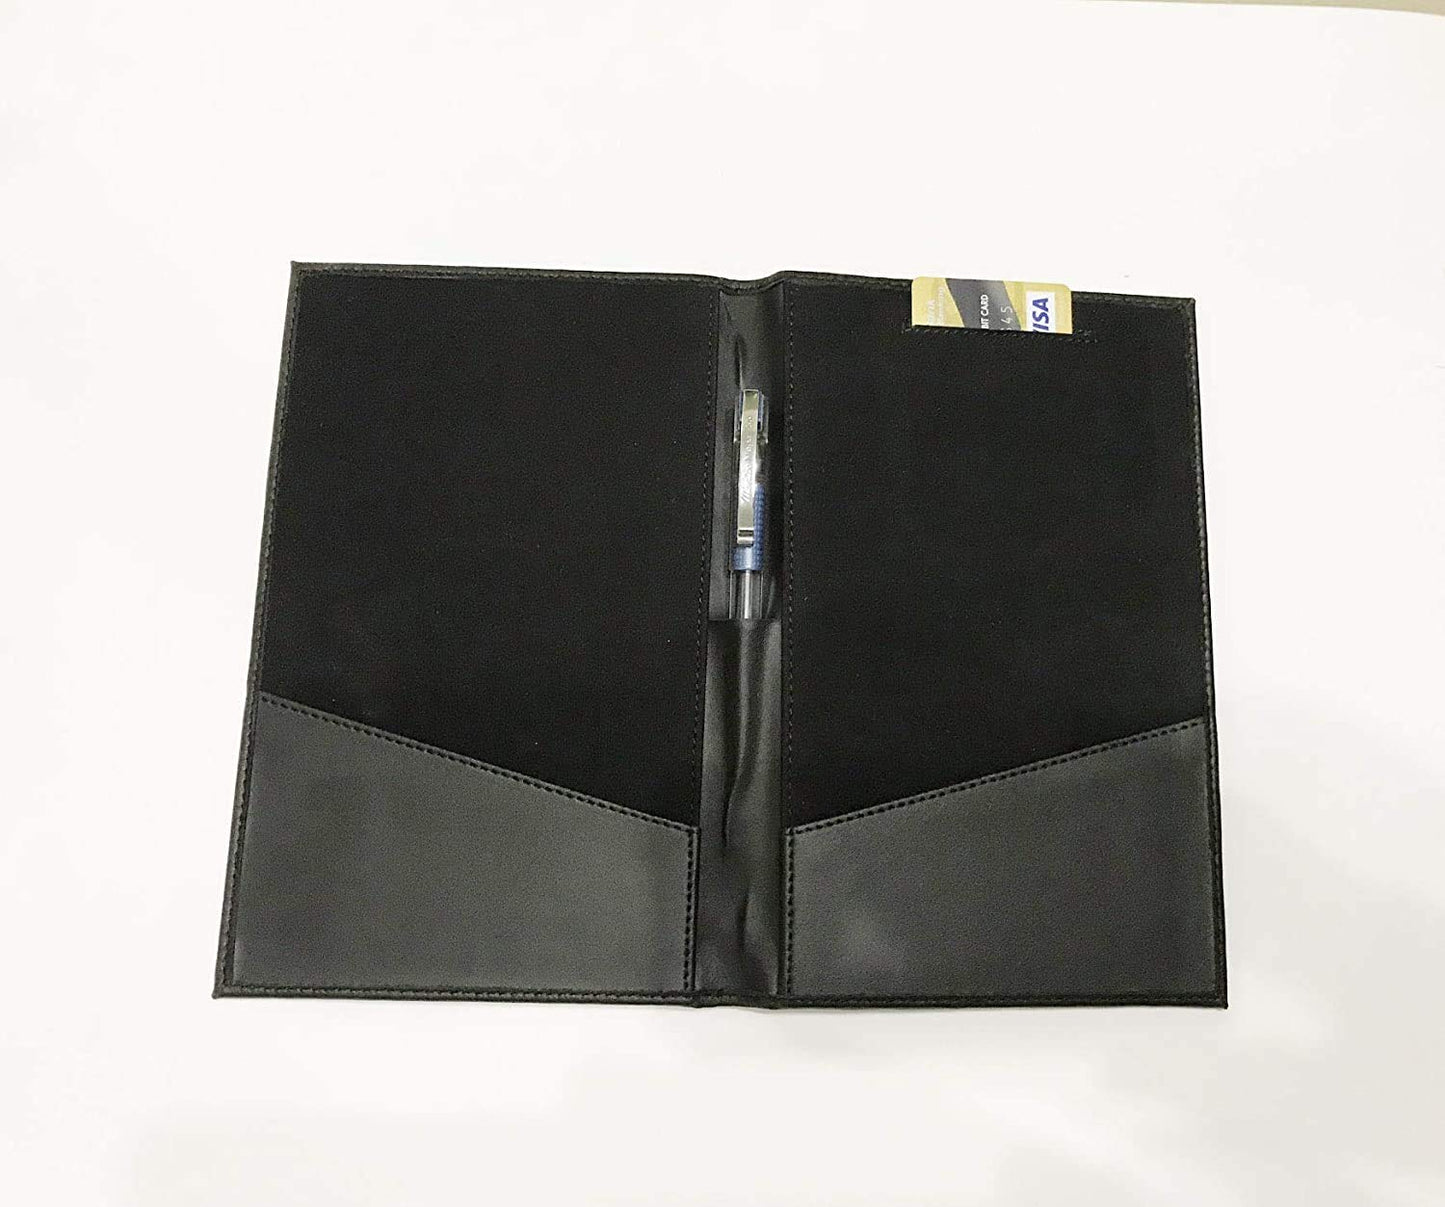 Rudra Exports Bill Folder for Hotel and Restaurant,Check Presenter, Bill Folder with Credit Card Slot Receipt Pocket for Hotel and Restaurant - Black Leather